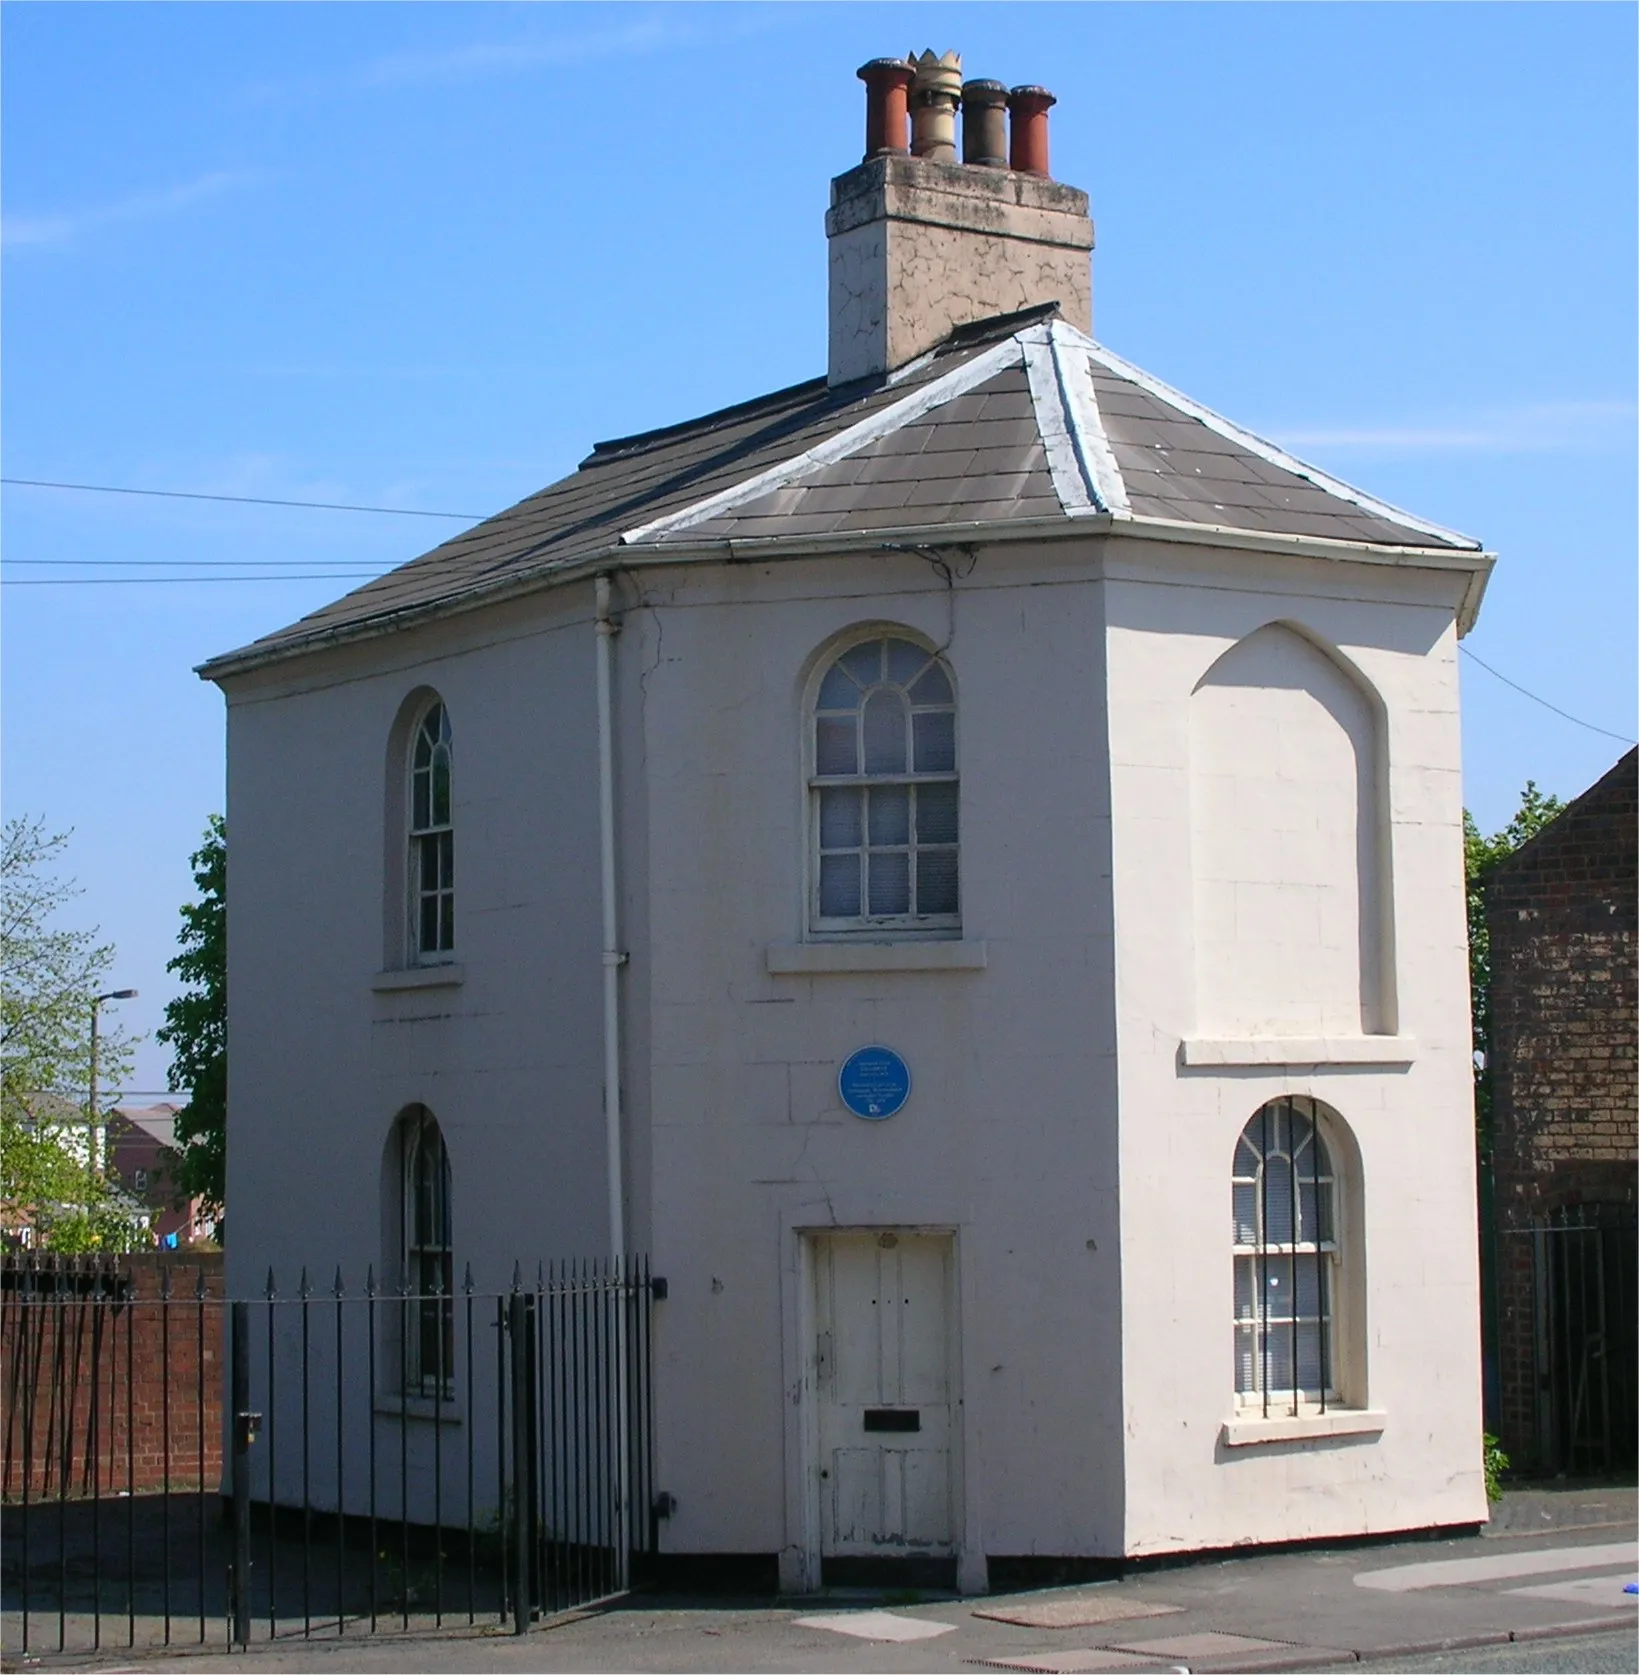 Photo showing: The old turnpike toll house in Smethwick, West Midlands, England. Designed by Yeoville Thomason. Grade II listed (IoE 219305). Photographed by me 2 May 2007. Oosoom)